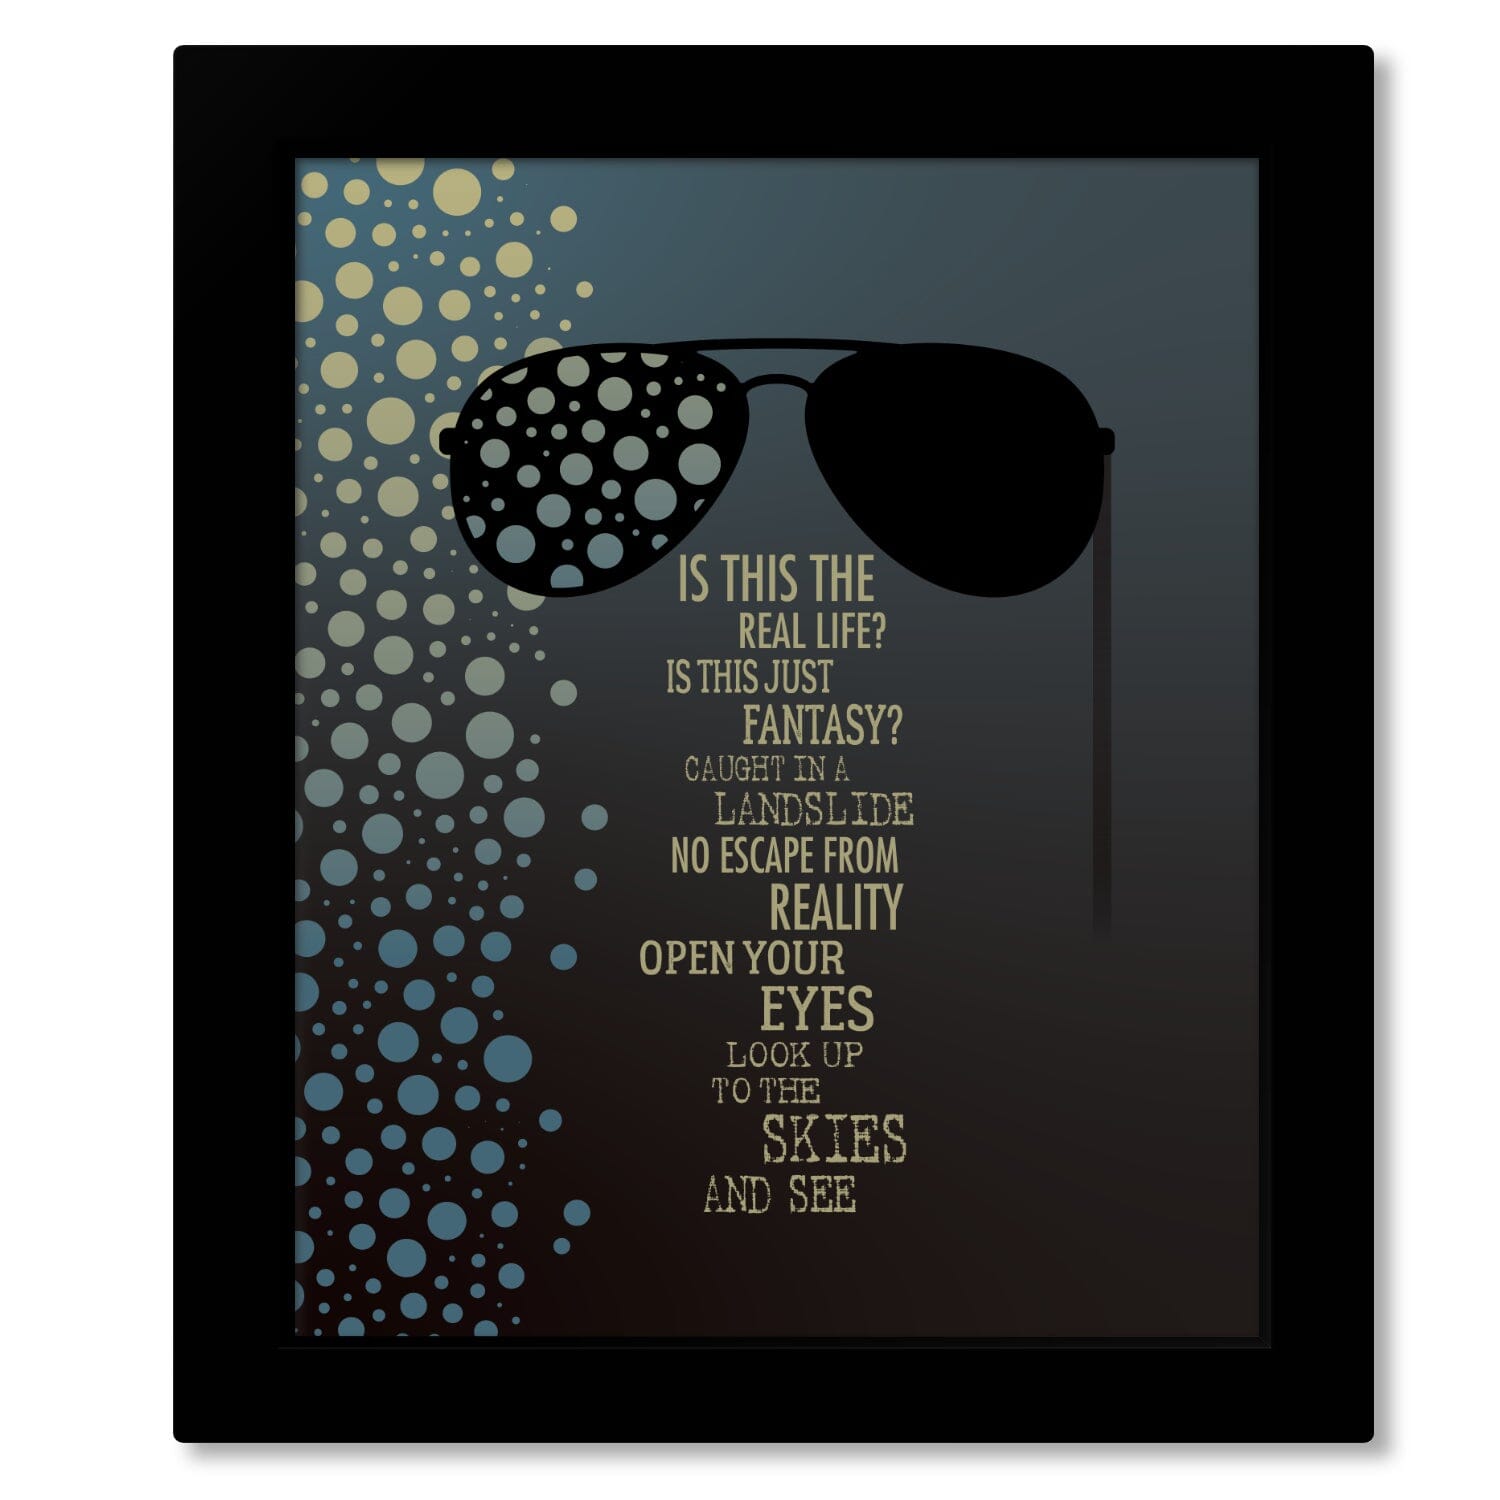 Bohemian Rhapsody by Queen - Music Enthusiast Lyric Art Song Lyrics Art Song Lyrics Art 8x10 Framed Print (without mat) 